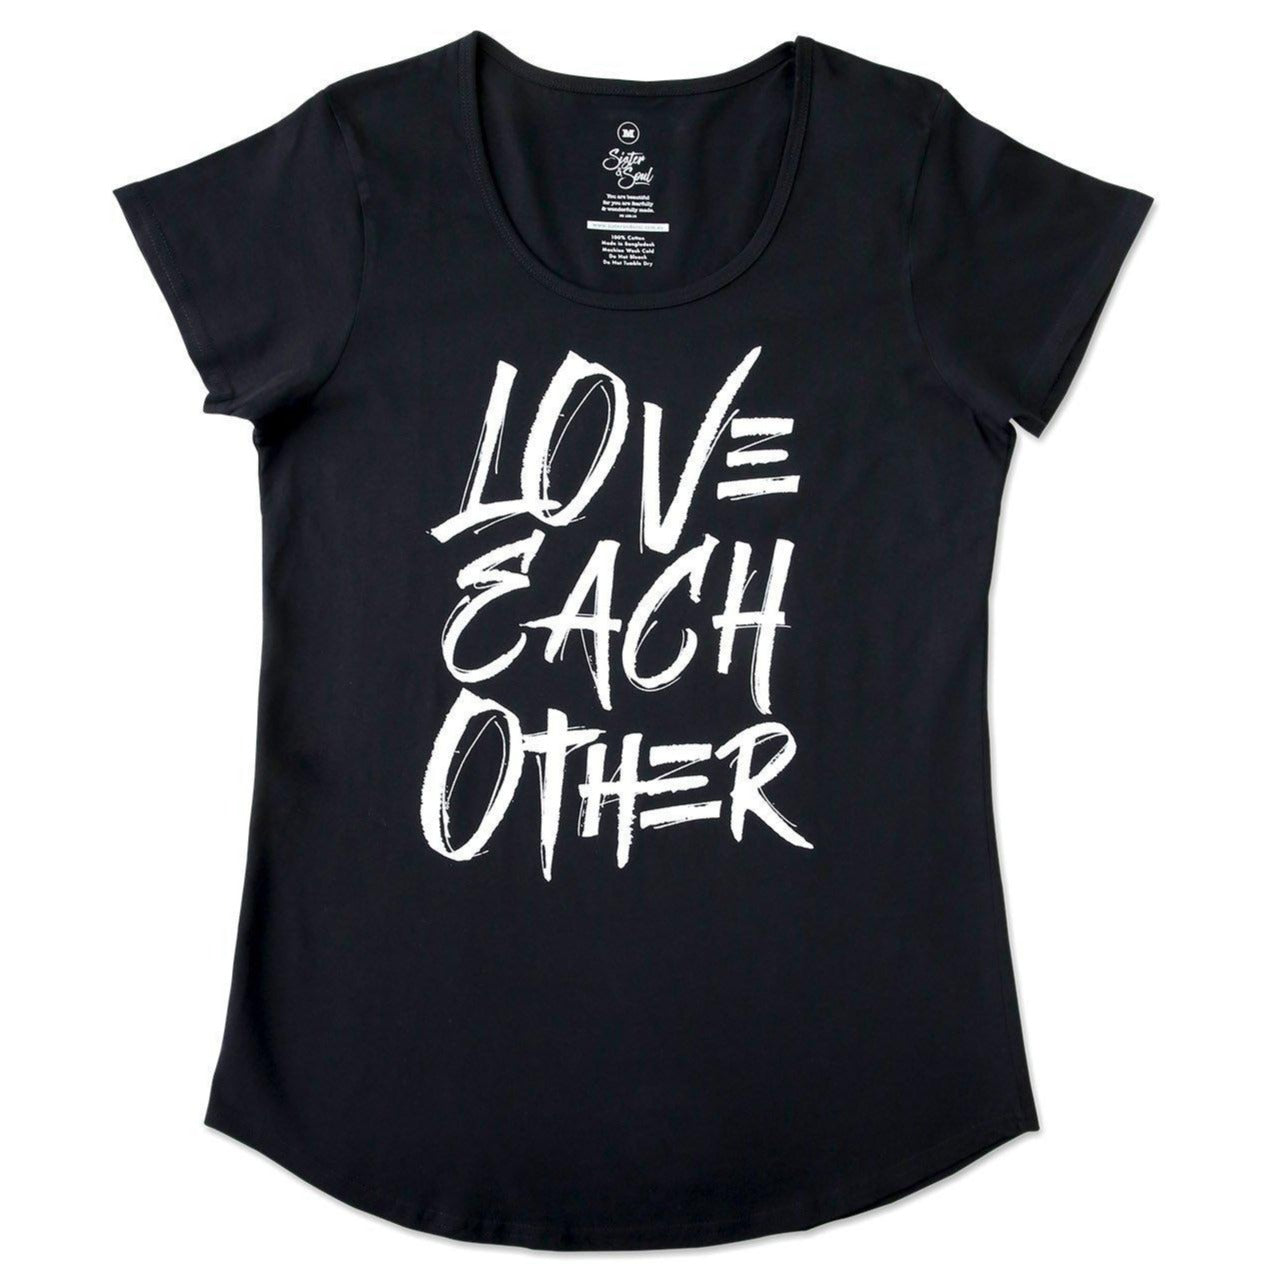 Black Love Each Other Motivational T-shirt with Scooped shape.